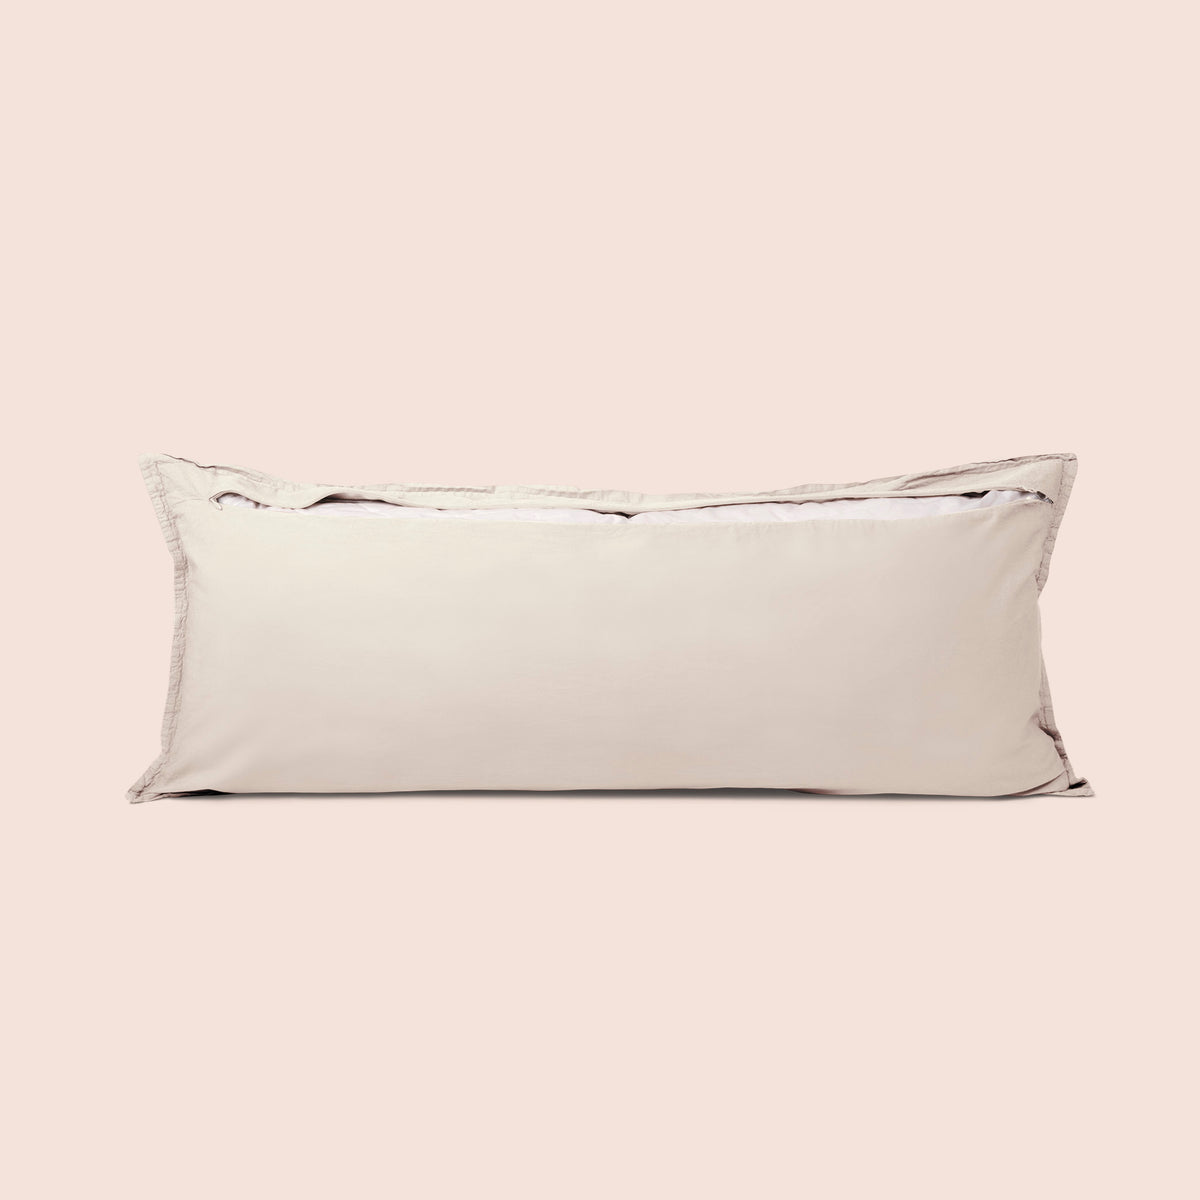 Image of the back of the Ecru Garment Washed Percale Lumbar Pillow Cover on a lumbar pillow with the back zipper open on a light pink background